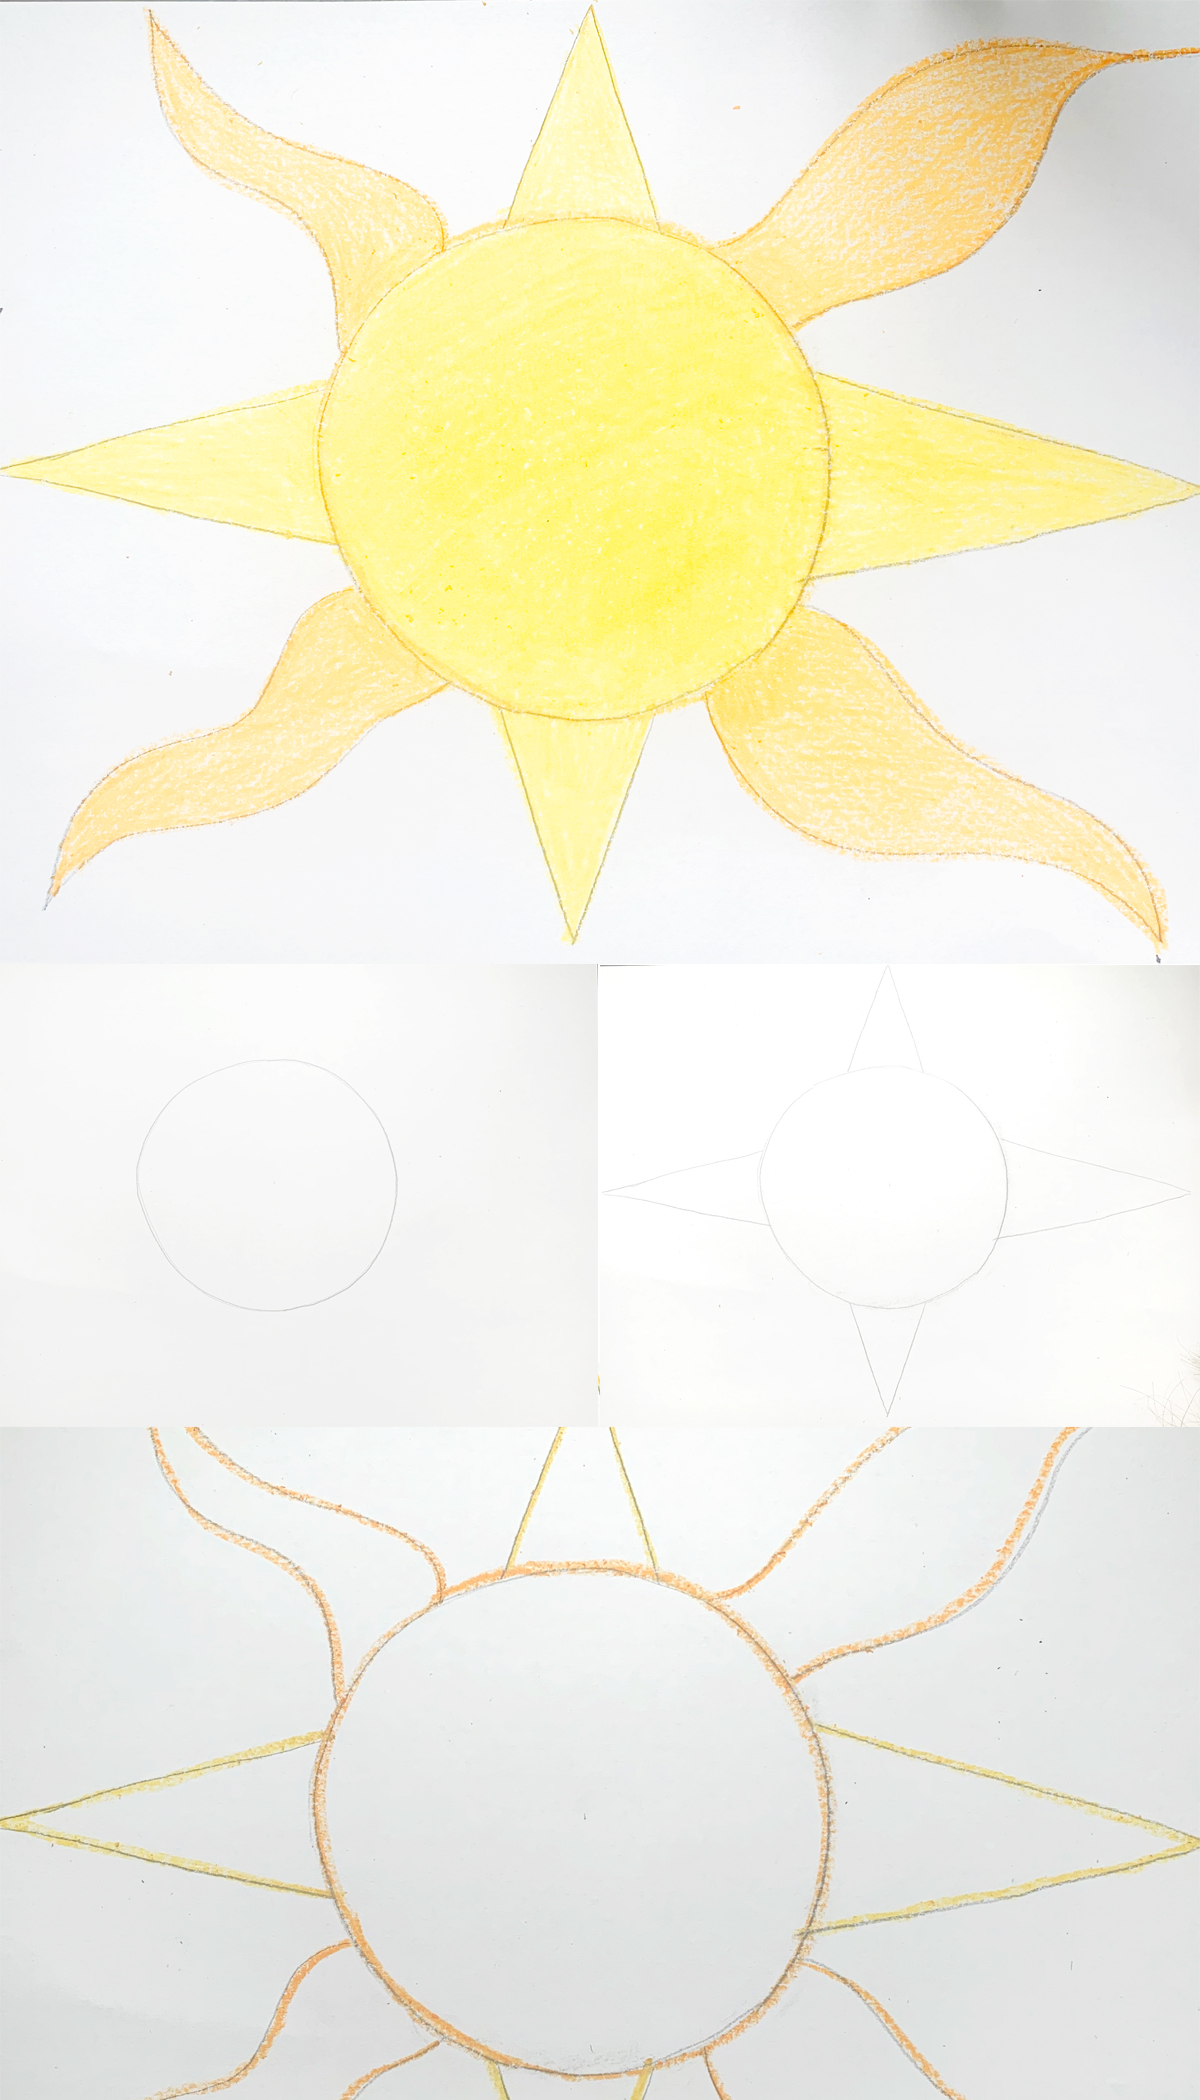 How to draw a sun step by step instructions